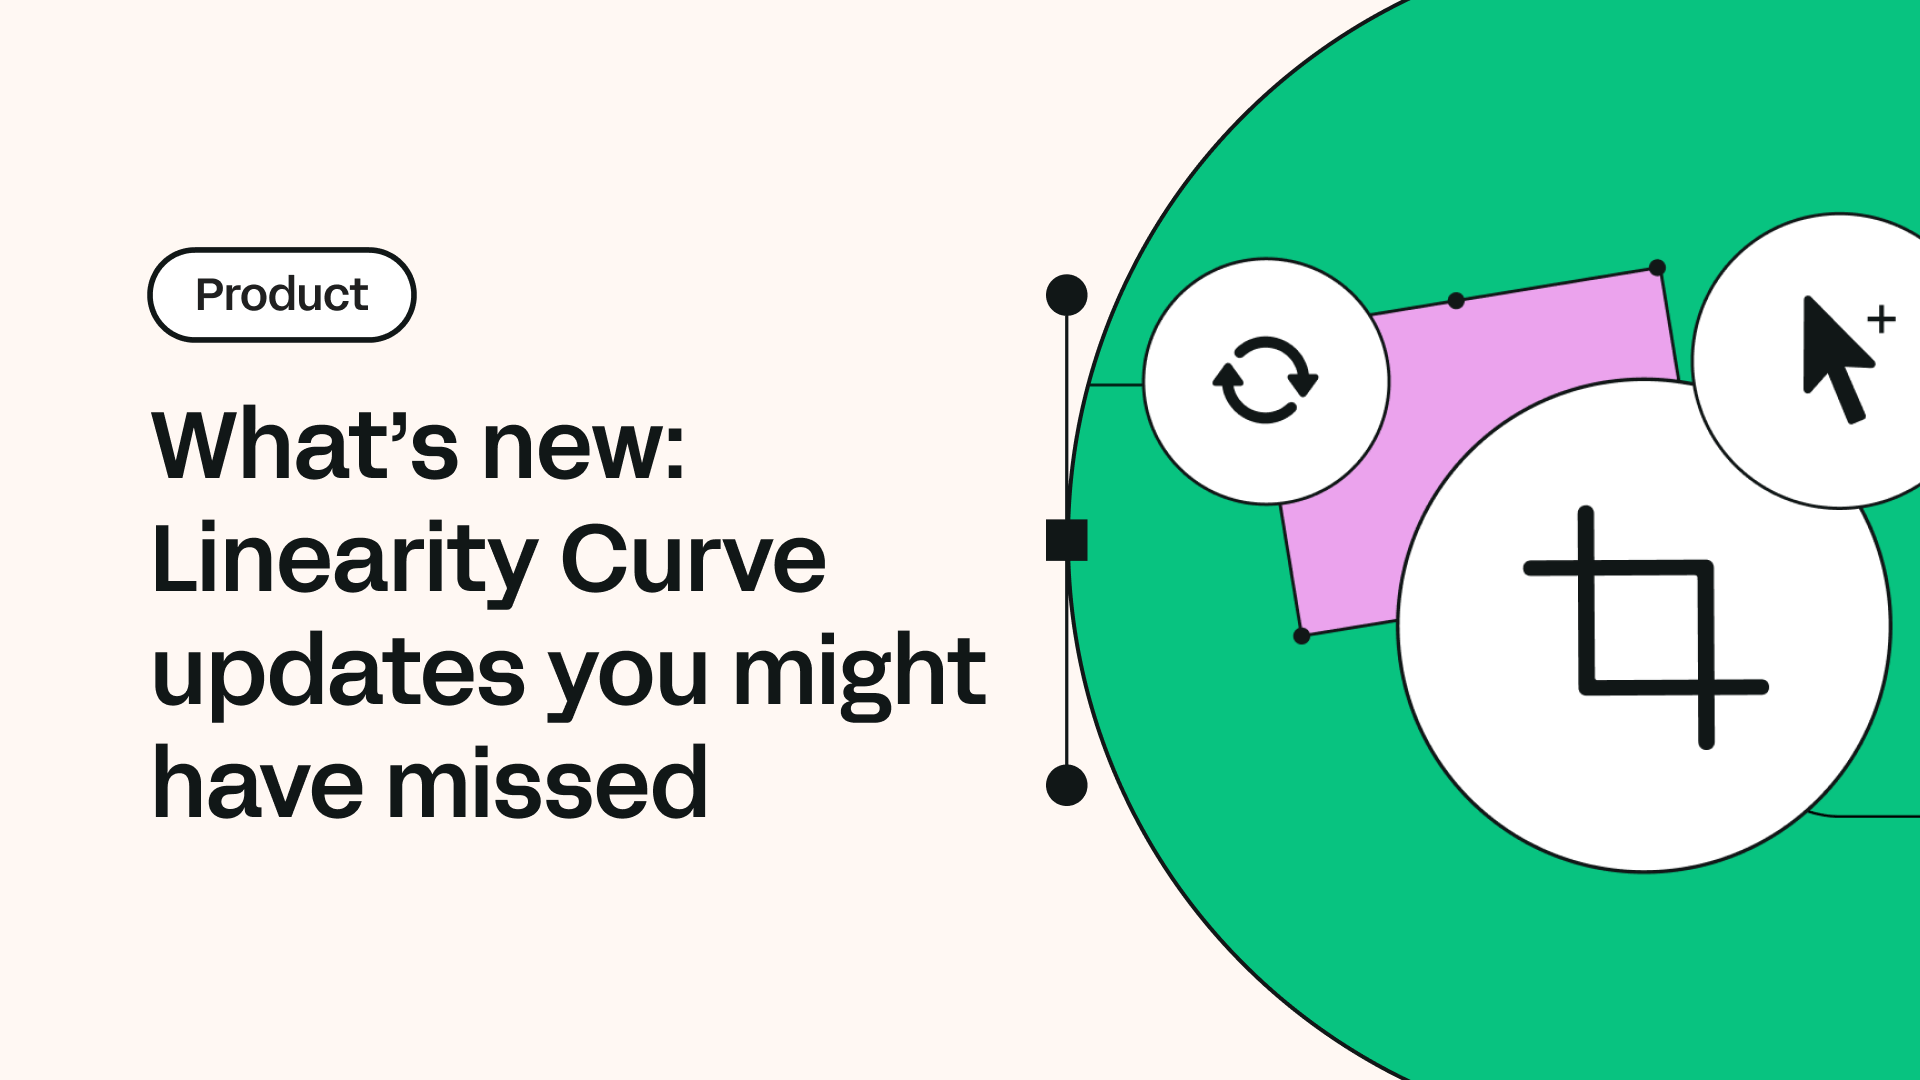 What’s new: Linearity Curve updates you might have missed | Linearity